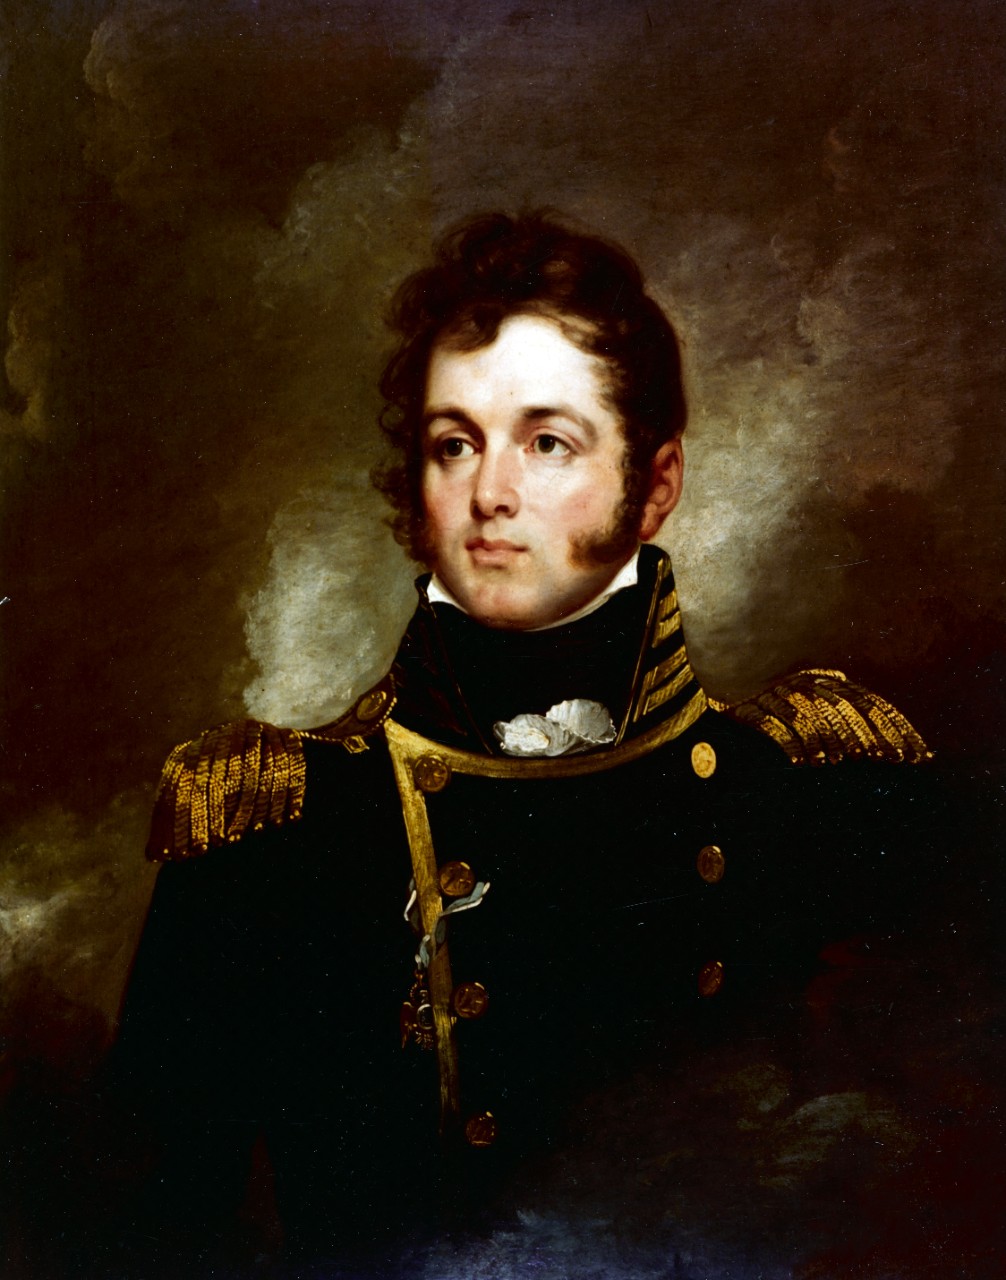 Photo #: KN-2783 Captain Oliver Hazard Perry, USN